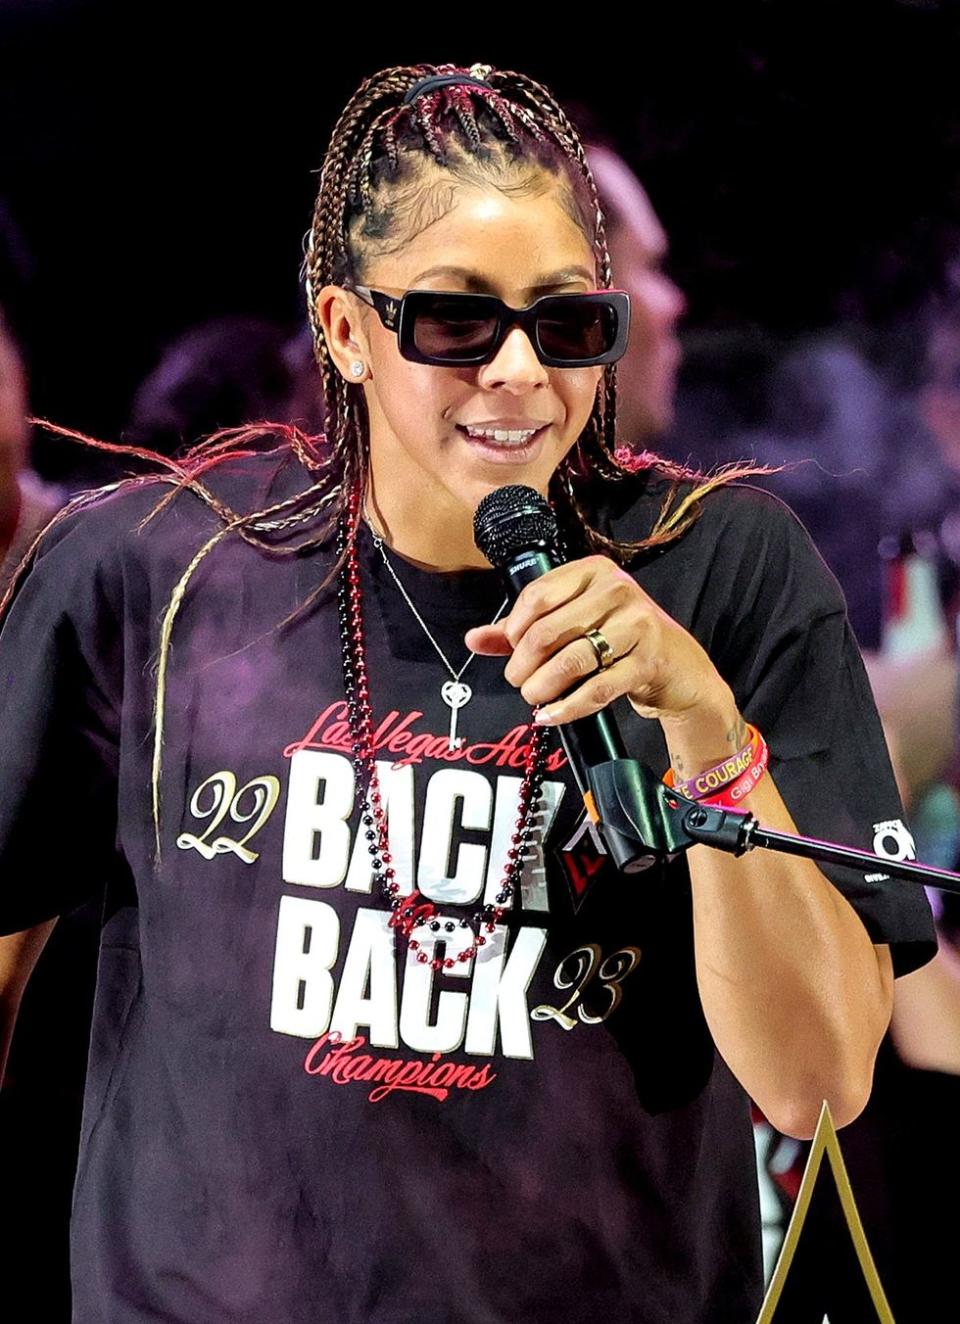 Las Vegas Aces WNBA Championship Winning Team Queer Basketball Player Candace Parker